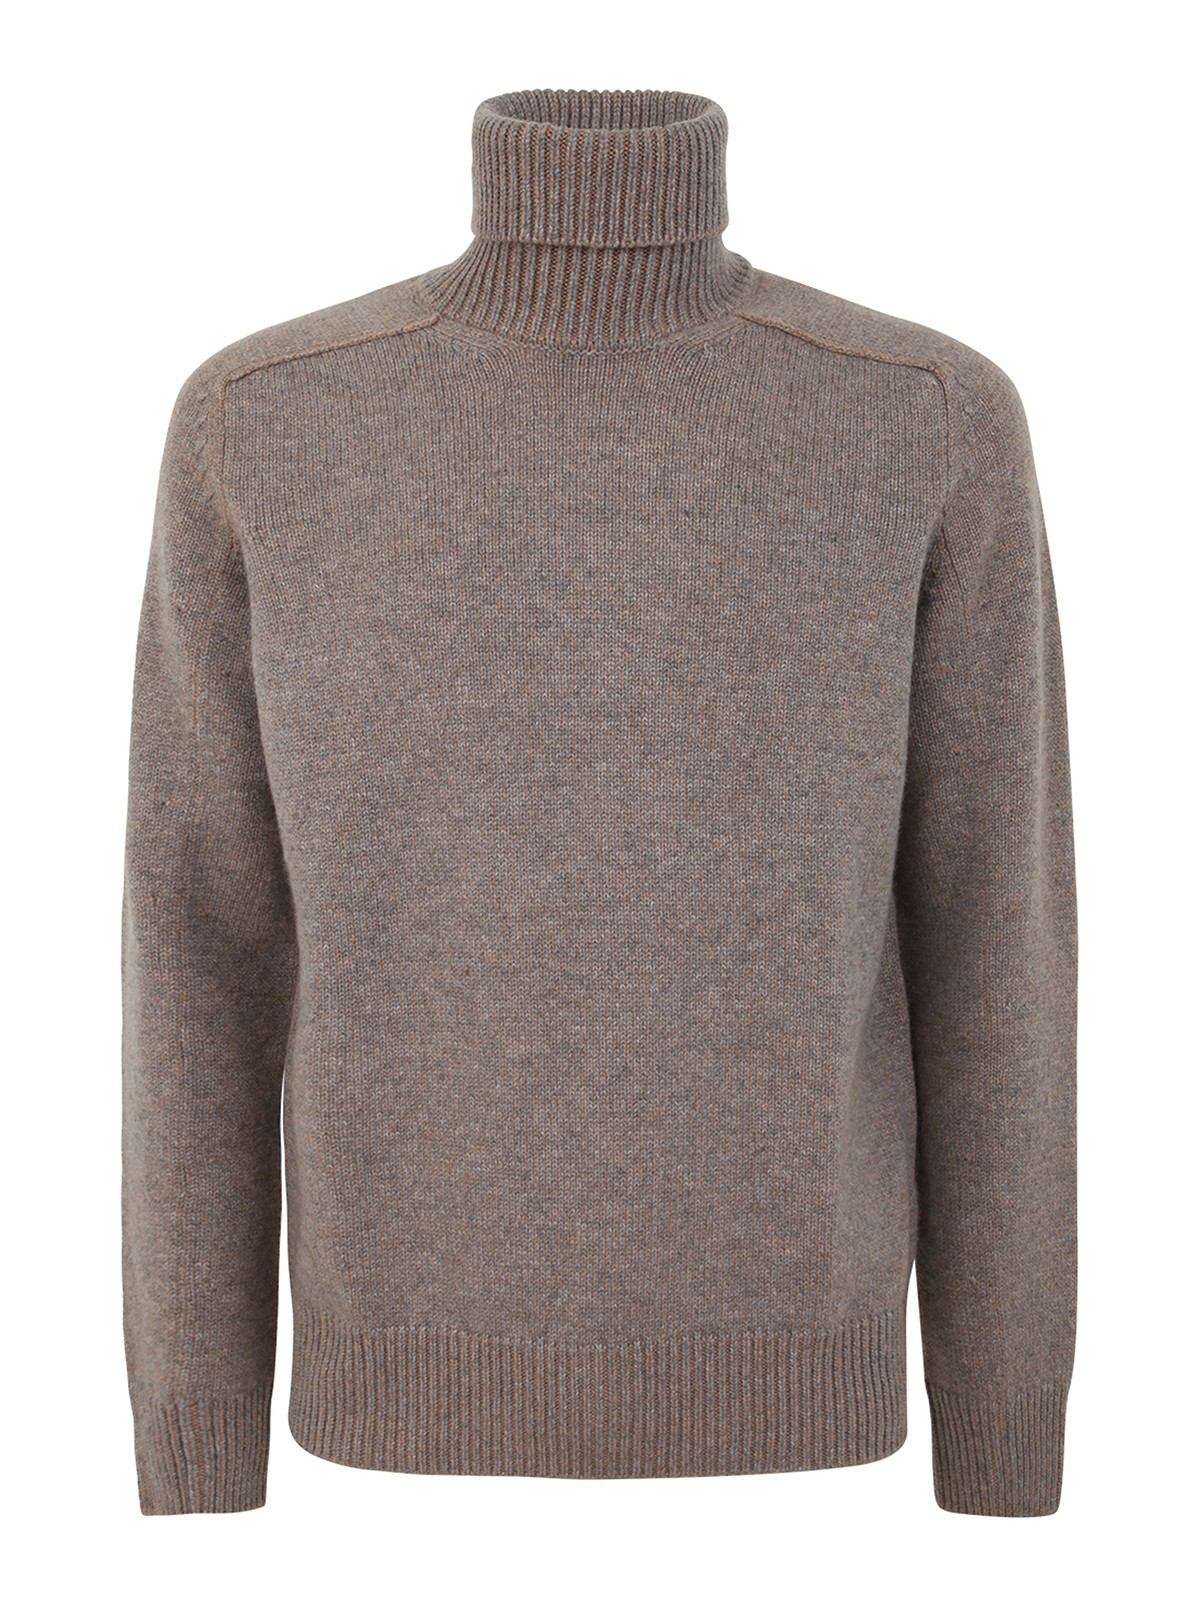 Zegna Oasi Cashmere Turtleneck Sweater In Brown